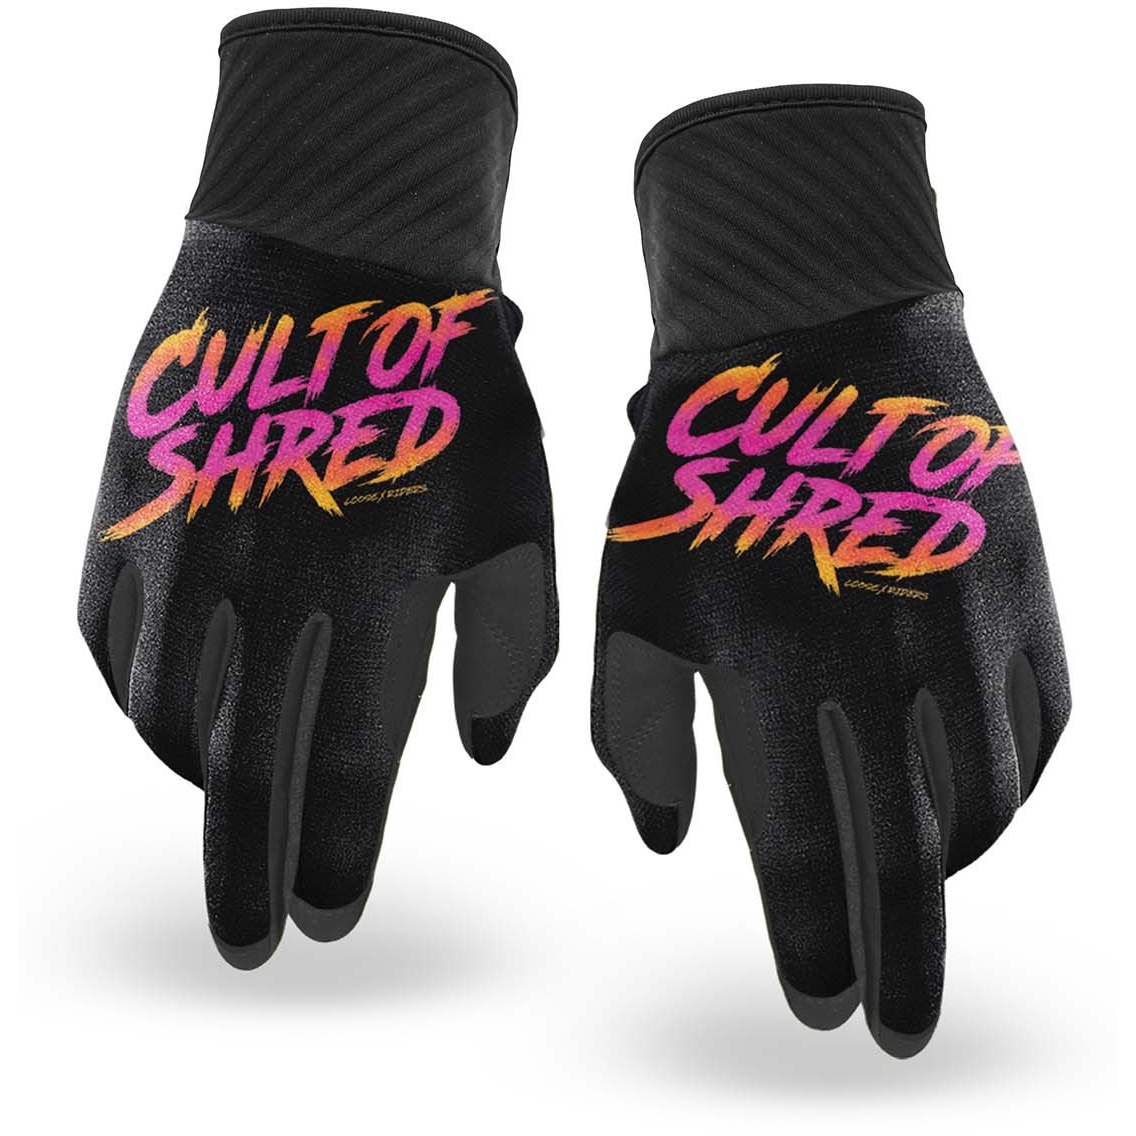 Picture of Loose Riders Technical Freeride Gloves - Rad Black